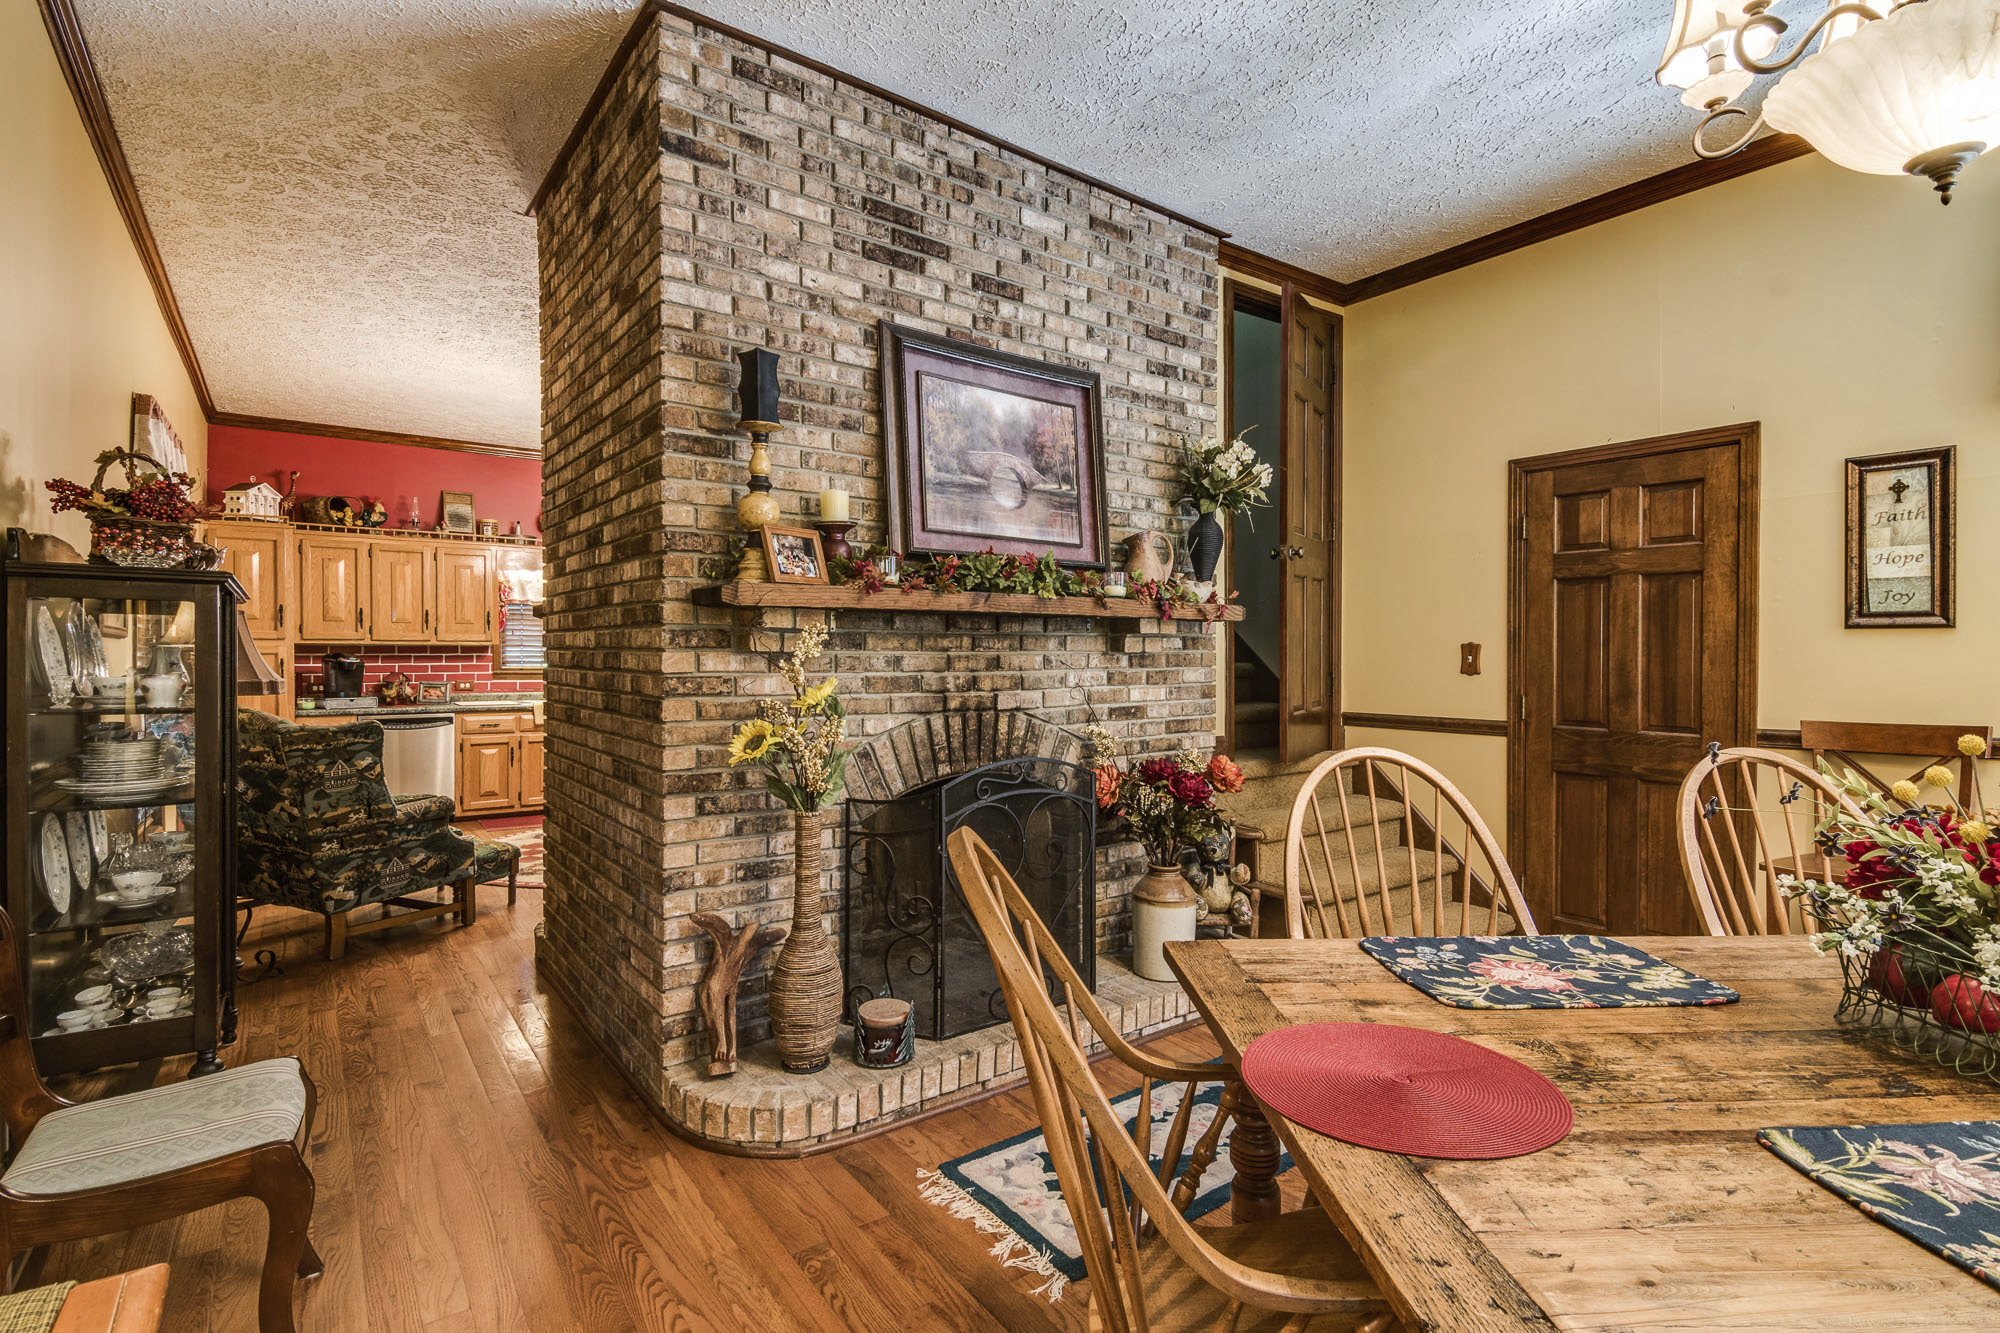 Pass Through Fireplace from Kitchen to Dining Room.jpg